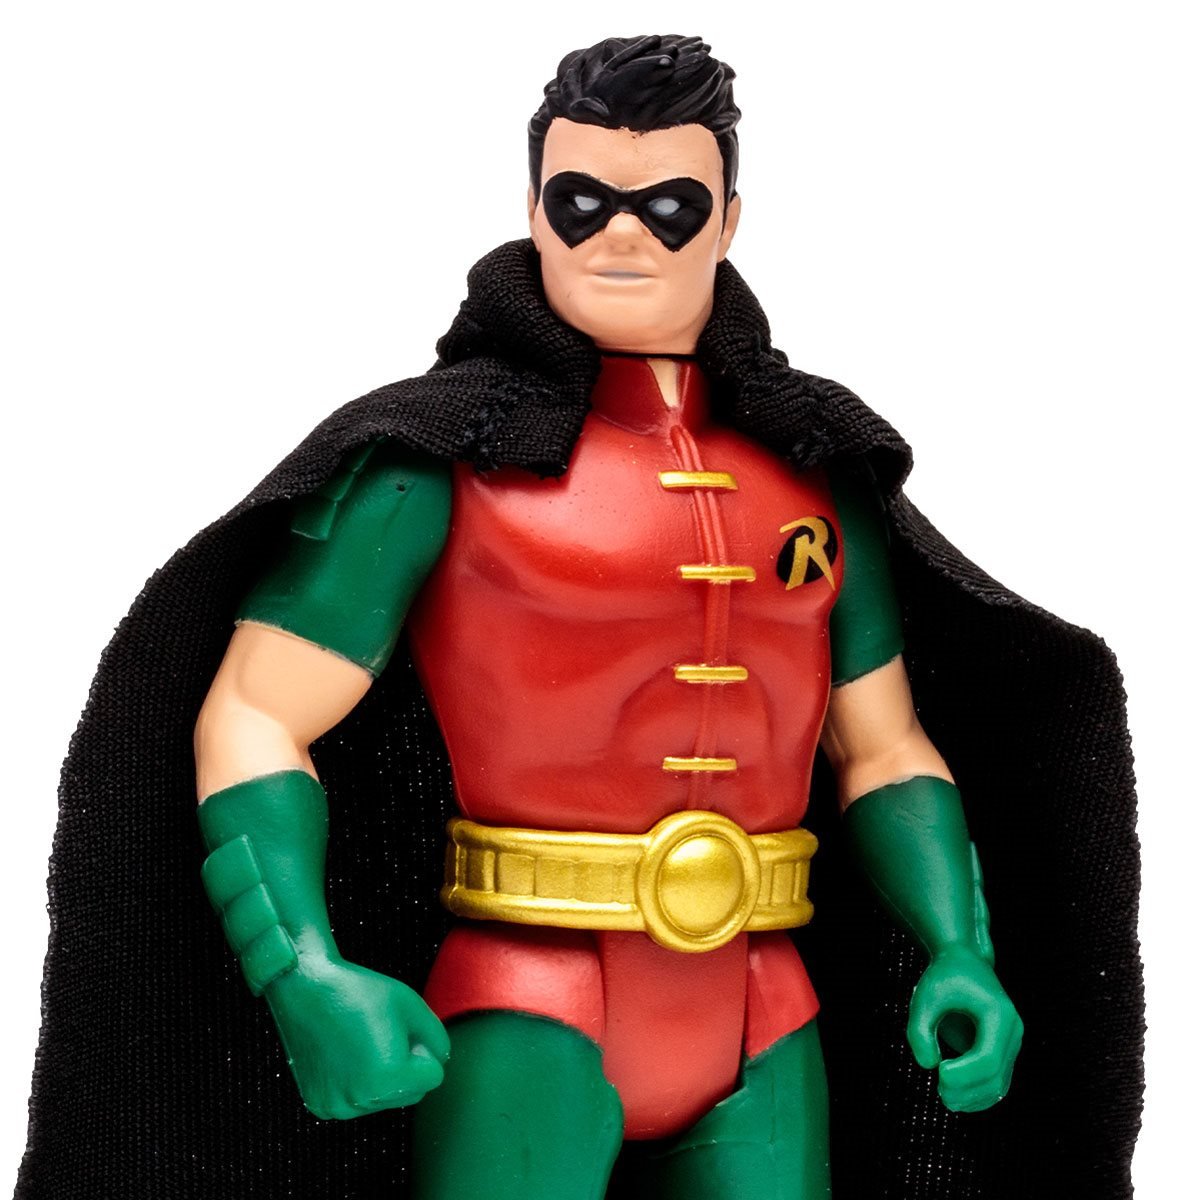 MCFARLANE DC Super Powers Wave 5 Robin Tim Drake Variant 4-Inch Scale Action Figure